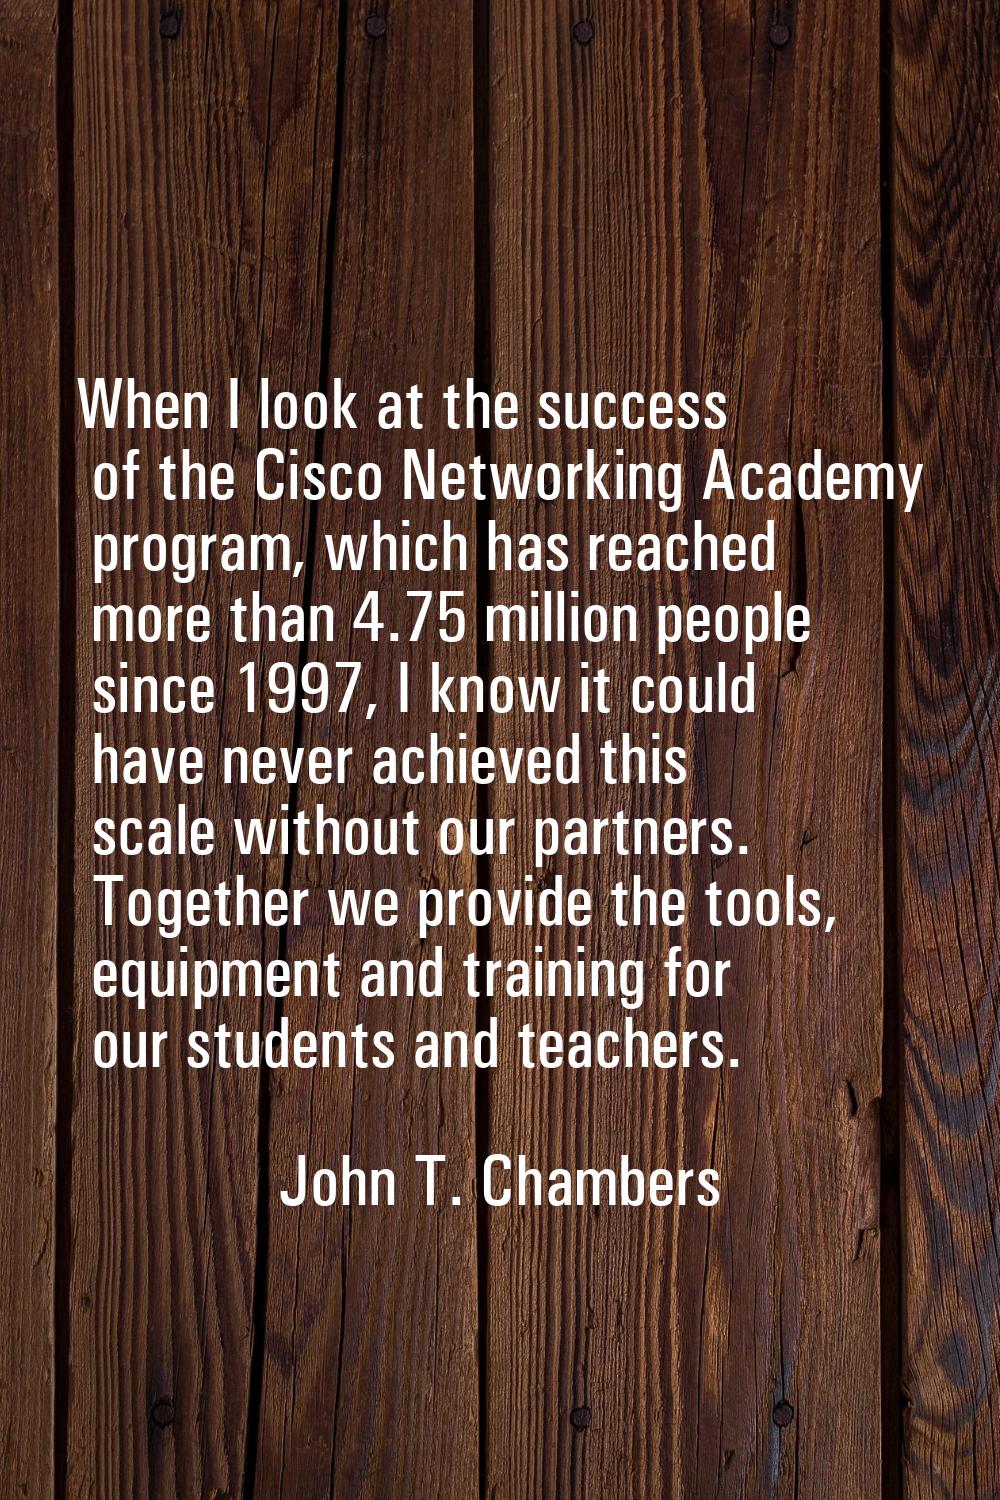 When I look at the success of the Cisco Networking Academy program, which has reached more than 4.7